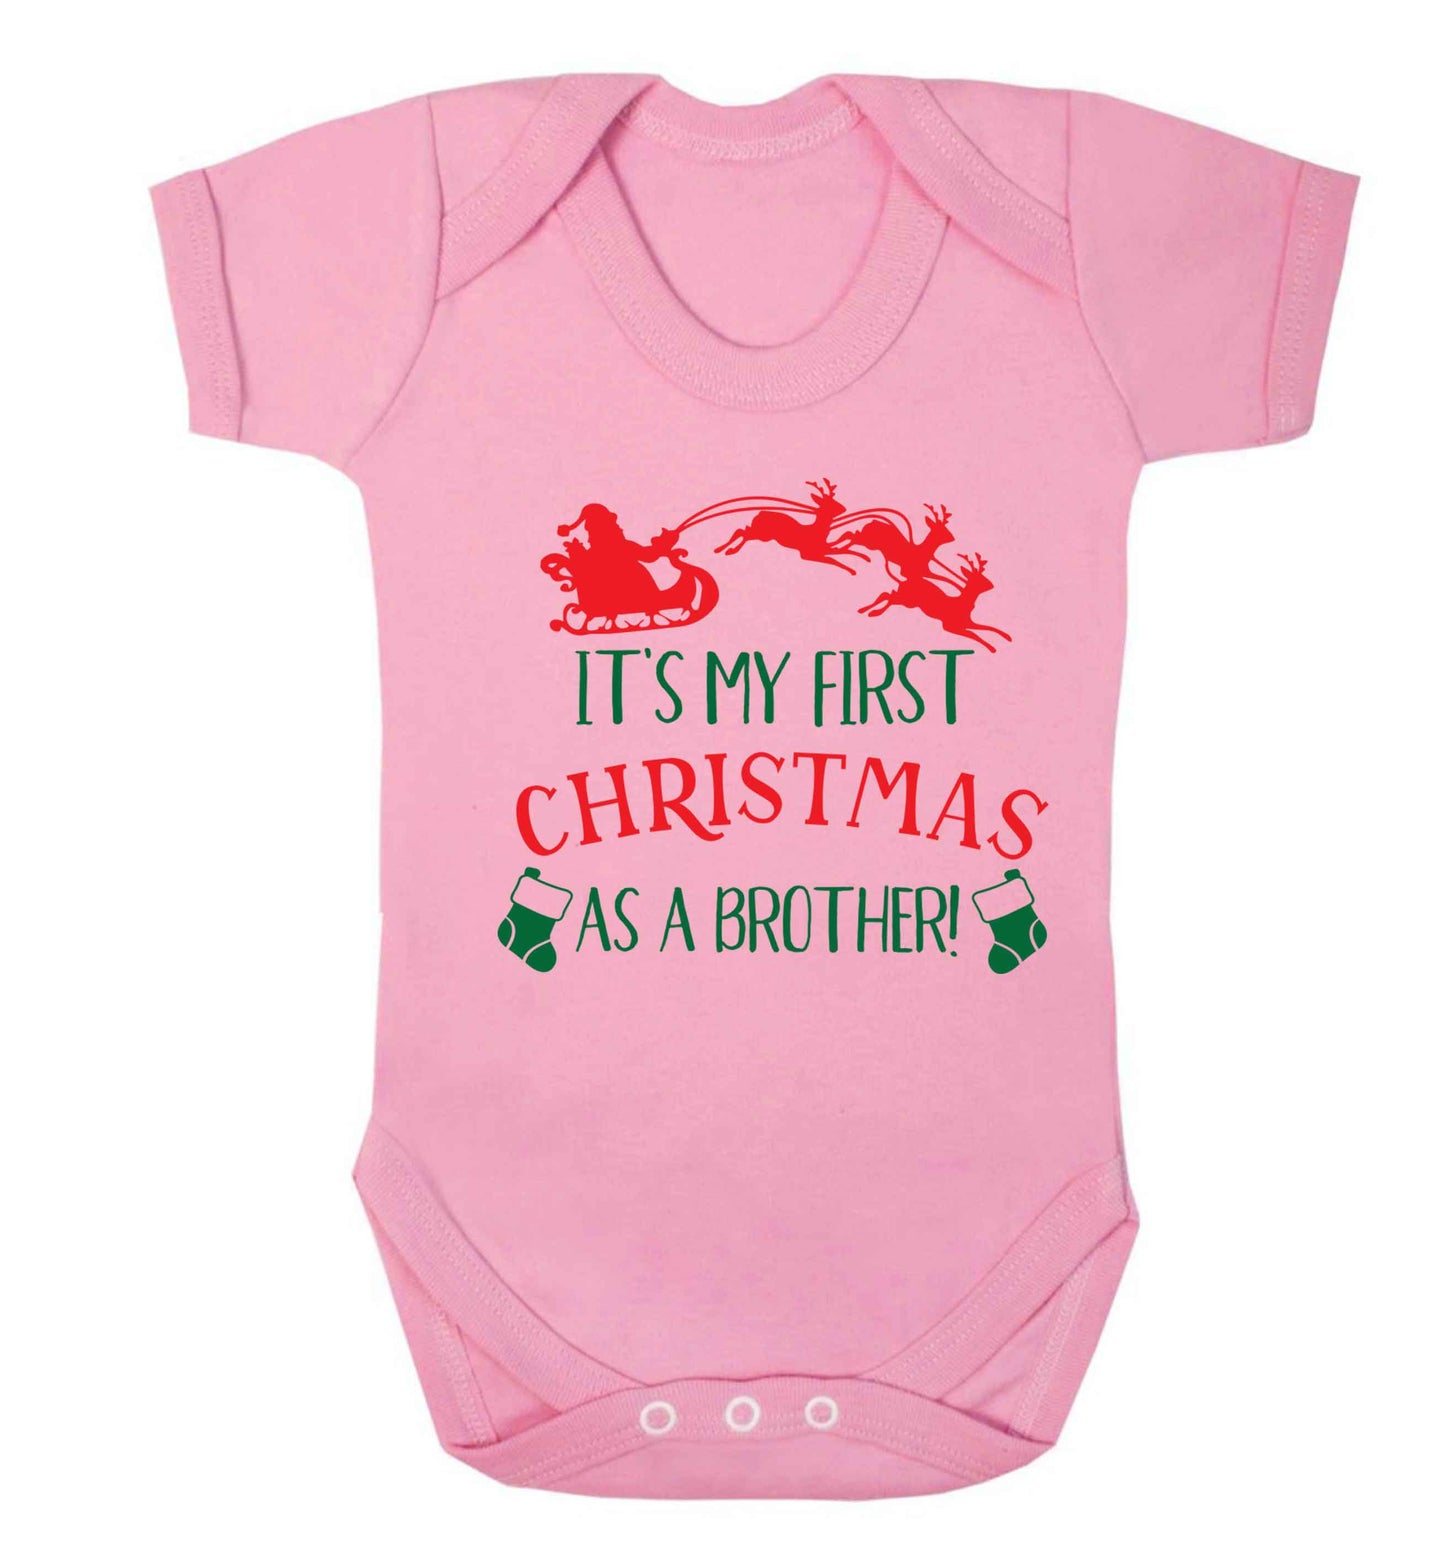 It's my first Christmas as a brother! Baby Vest pale pink 18-24 months